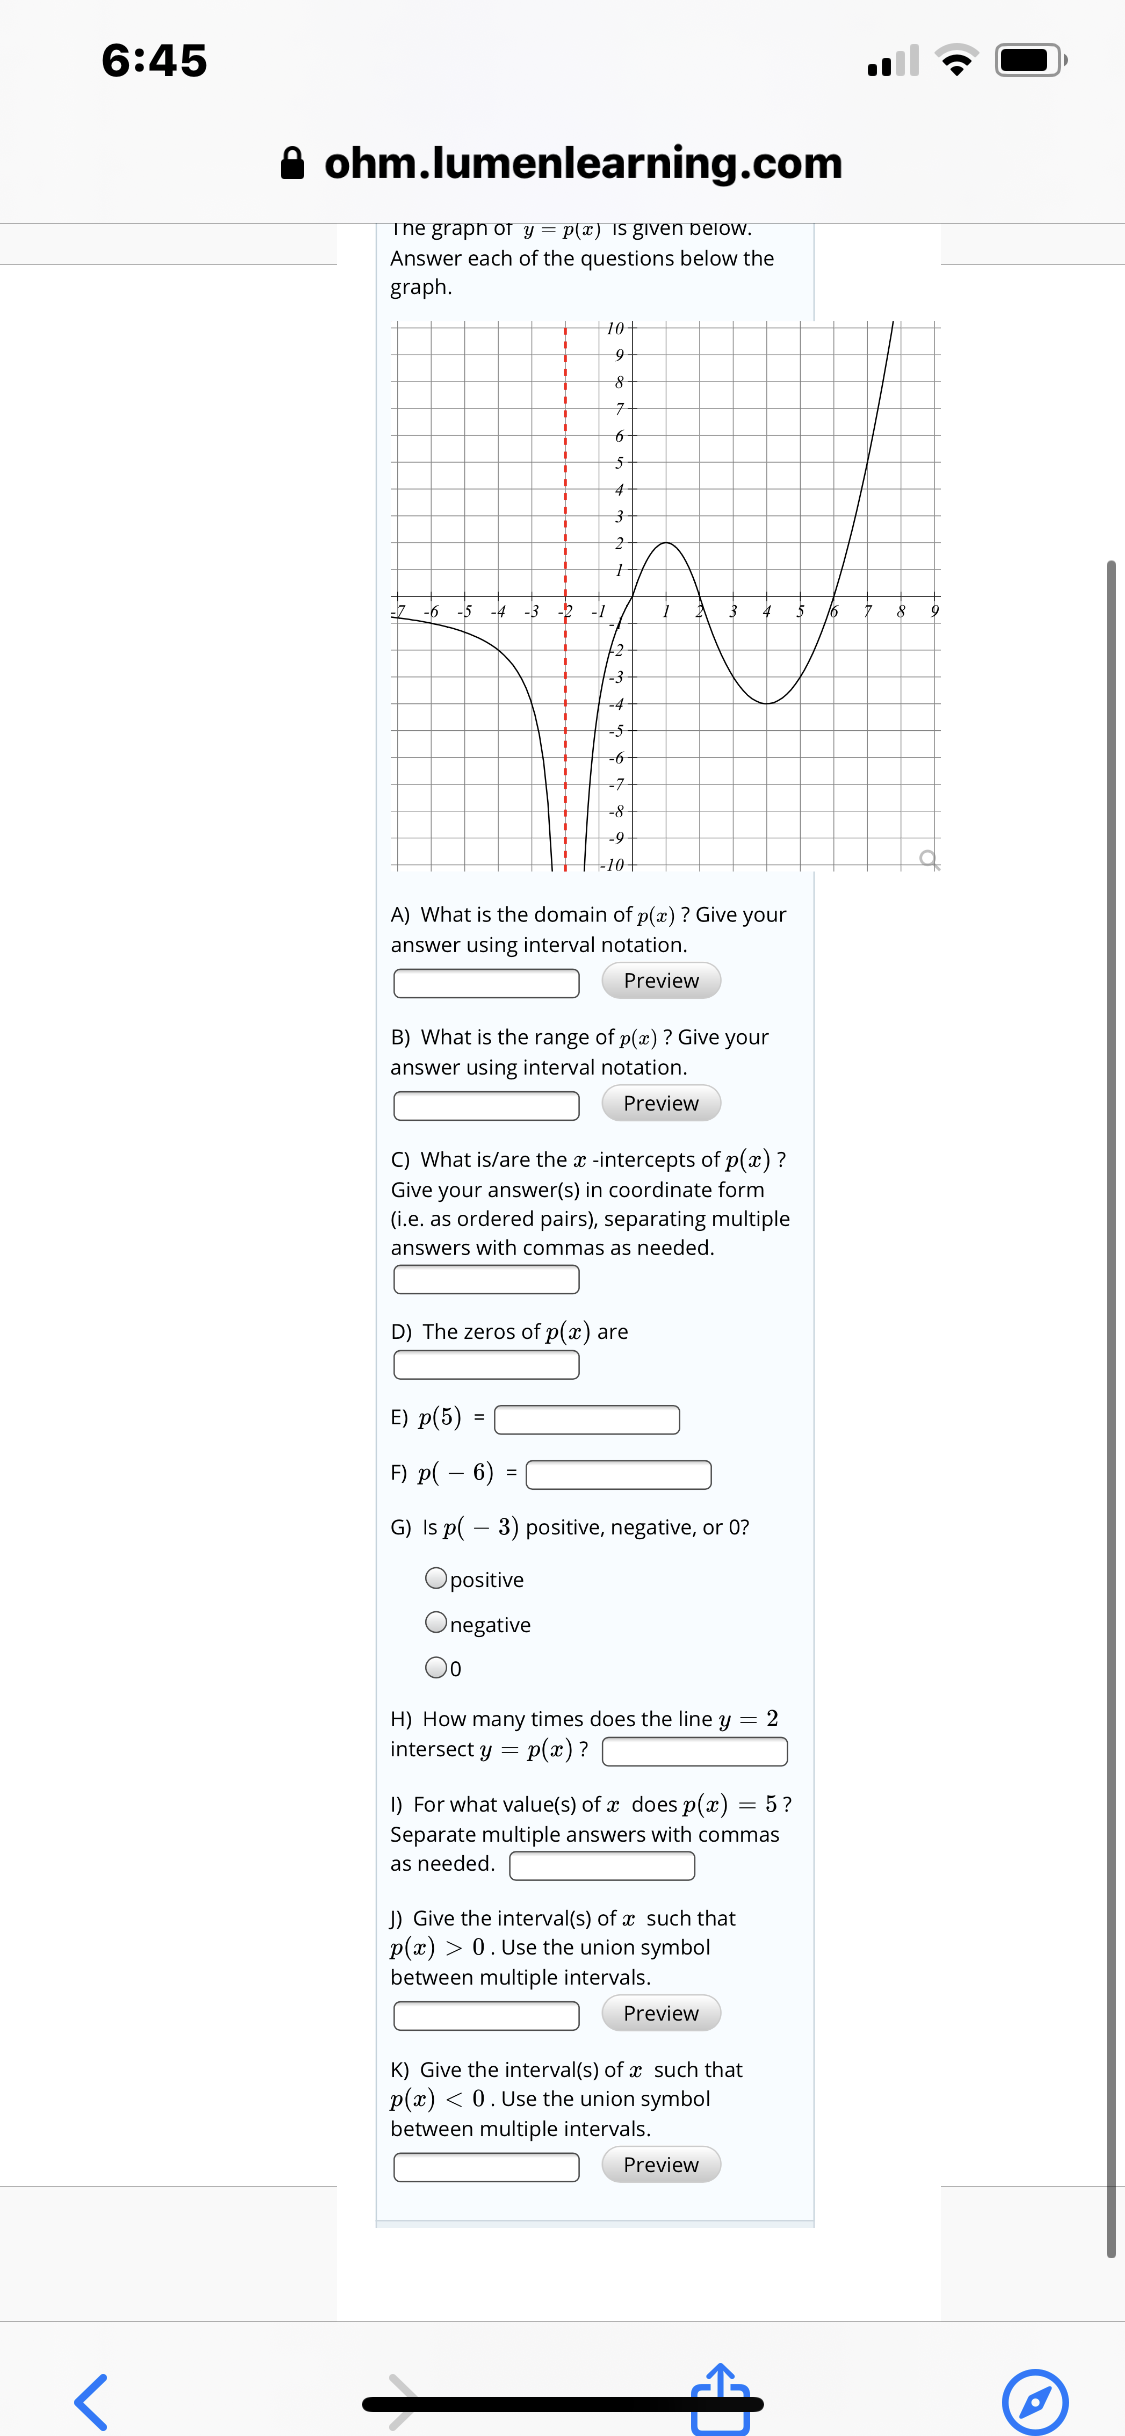 6:45
A ohm.lumenlearning.com
The graph of y = p(x) IS given below.
Answer each of the questions below the
graph.
10
5-
-5 -4 -3
-1
16
+2
-3
-4
-6
-7-
-8
-9
-10+
A) What is the domain of p(x) ? Give your
answer using interval notation.
Preview
B) What is the range of p(æ) ? Give your
answer using interval notation.
Preview
C) What is/are the x -intercepts of p(x) ?
Give your answer(s) in coordinate form
(i.e. as ordered pairs), separating multiple
answers with commas as needed.
D) The zeros of p(x) are
E) p(5) =
F) p( – 6) =
G) Is p( – 3) positive, negative, or 0?
Opositive
Onegative
00
H) How many times does the line y = 2
p(x) ?
intersect y =
I) For what value(s) of x does p(x) = 5?
Separate multiple answers with commas
as needed.
J) Give the interval(s) of x such that
p(x) > 0. Use the union symbol
between multiple intervals.
Preview
K) Give the interval(s) of x such that
p(x) < 0. Use the union symbol
between multiple intervals.
Preview
